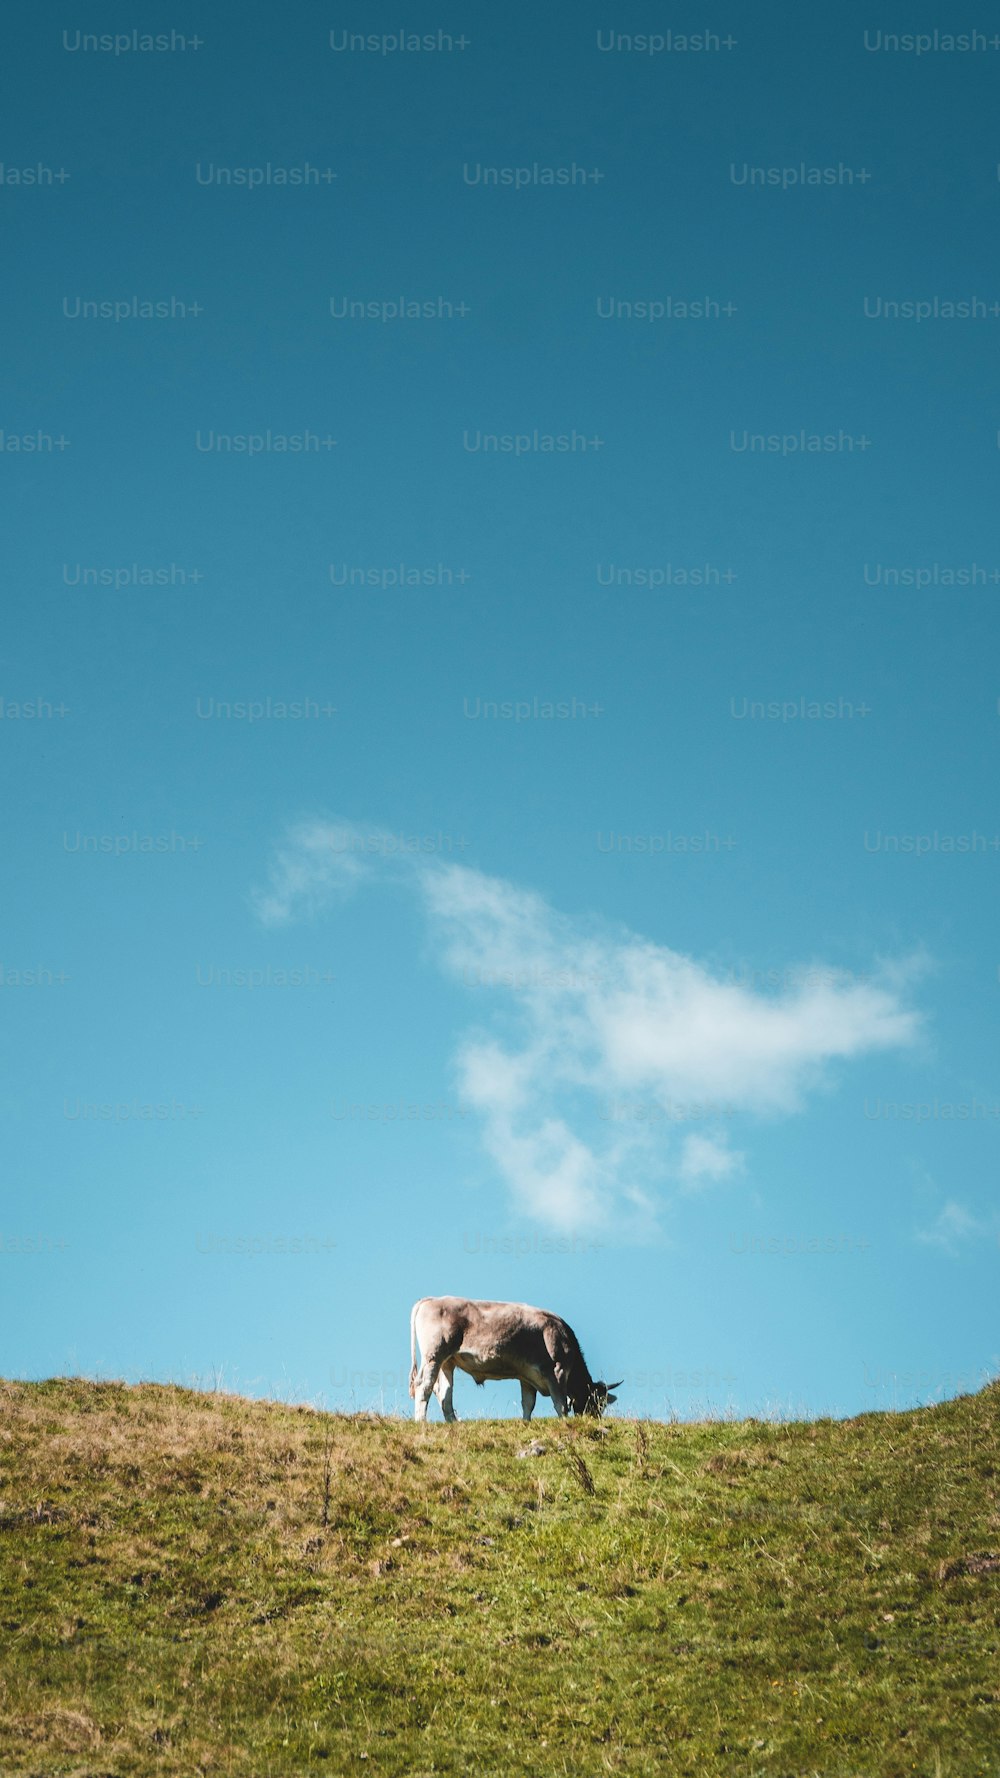 a horse grazing on a grassy hill under a blue sky